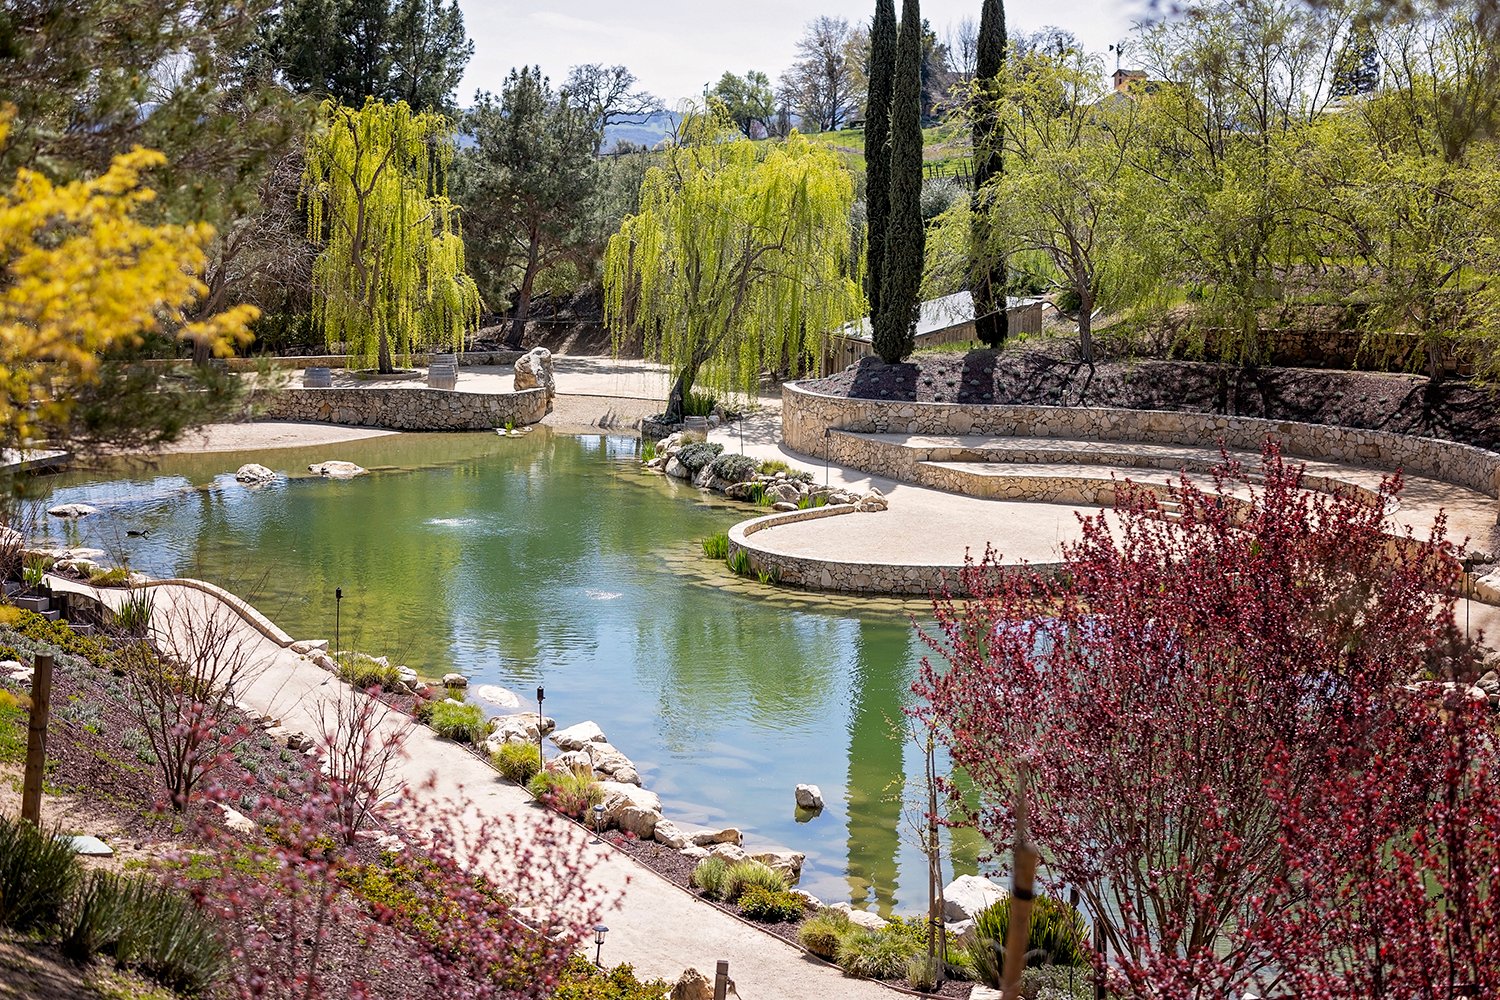 pond surrounded by terraces and amphitheater seating